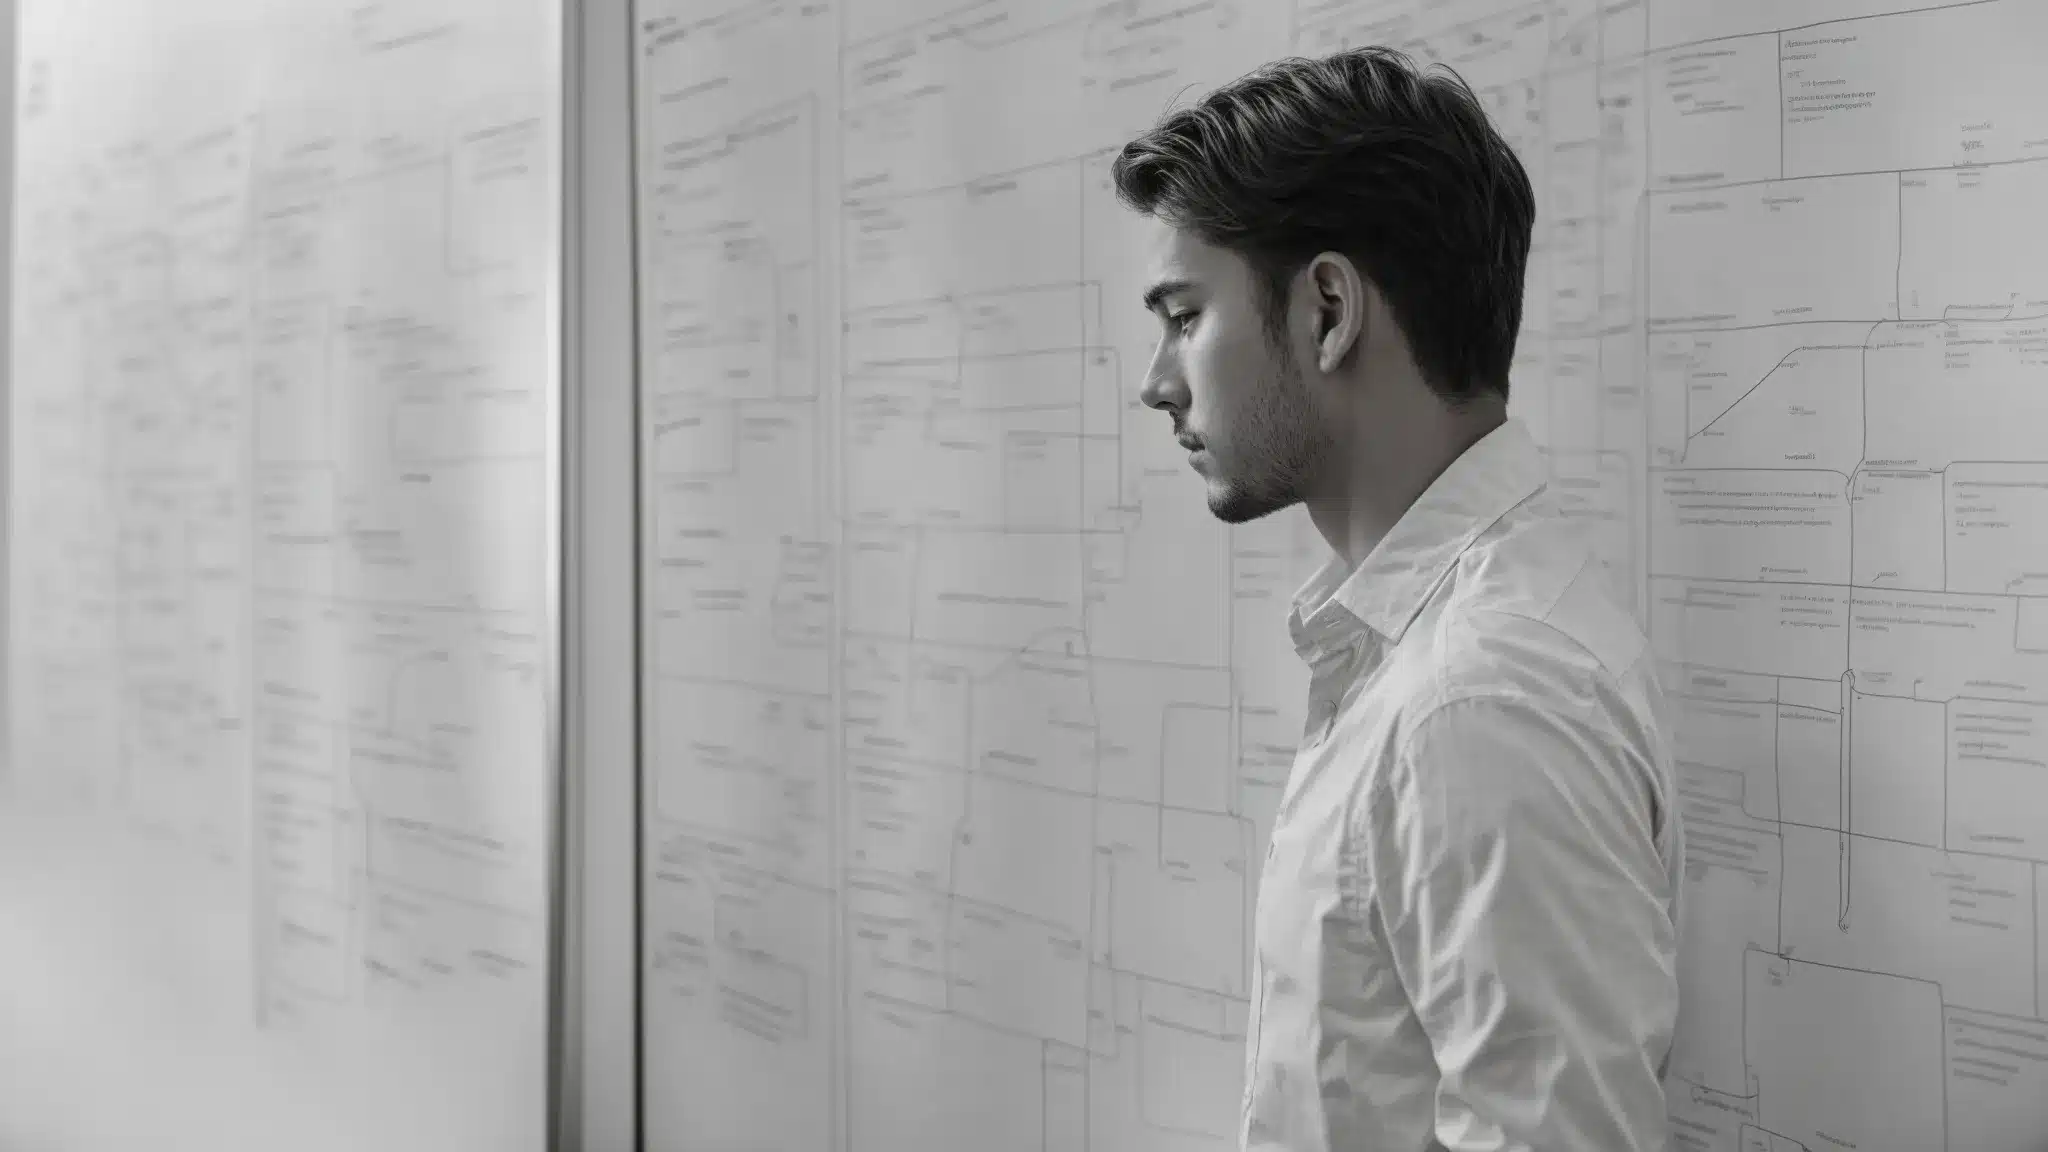 a web developer intently studies flowcharts and site maps on a whiteboard illustrating website architecture.